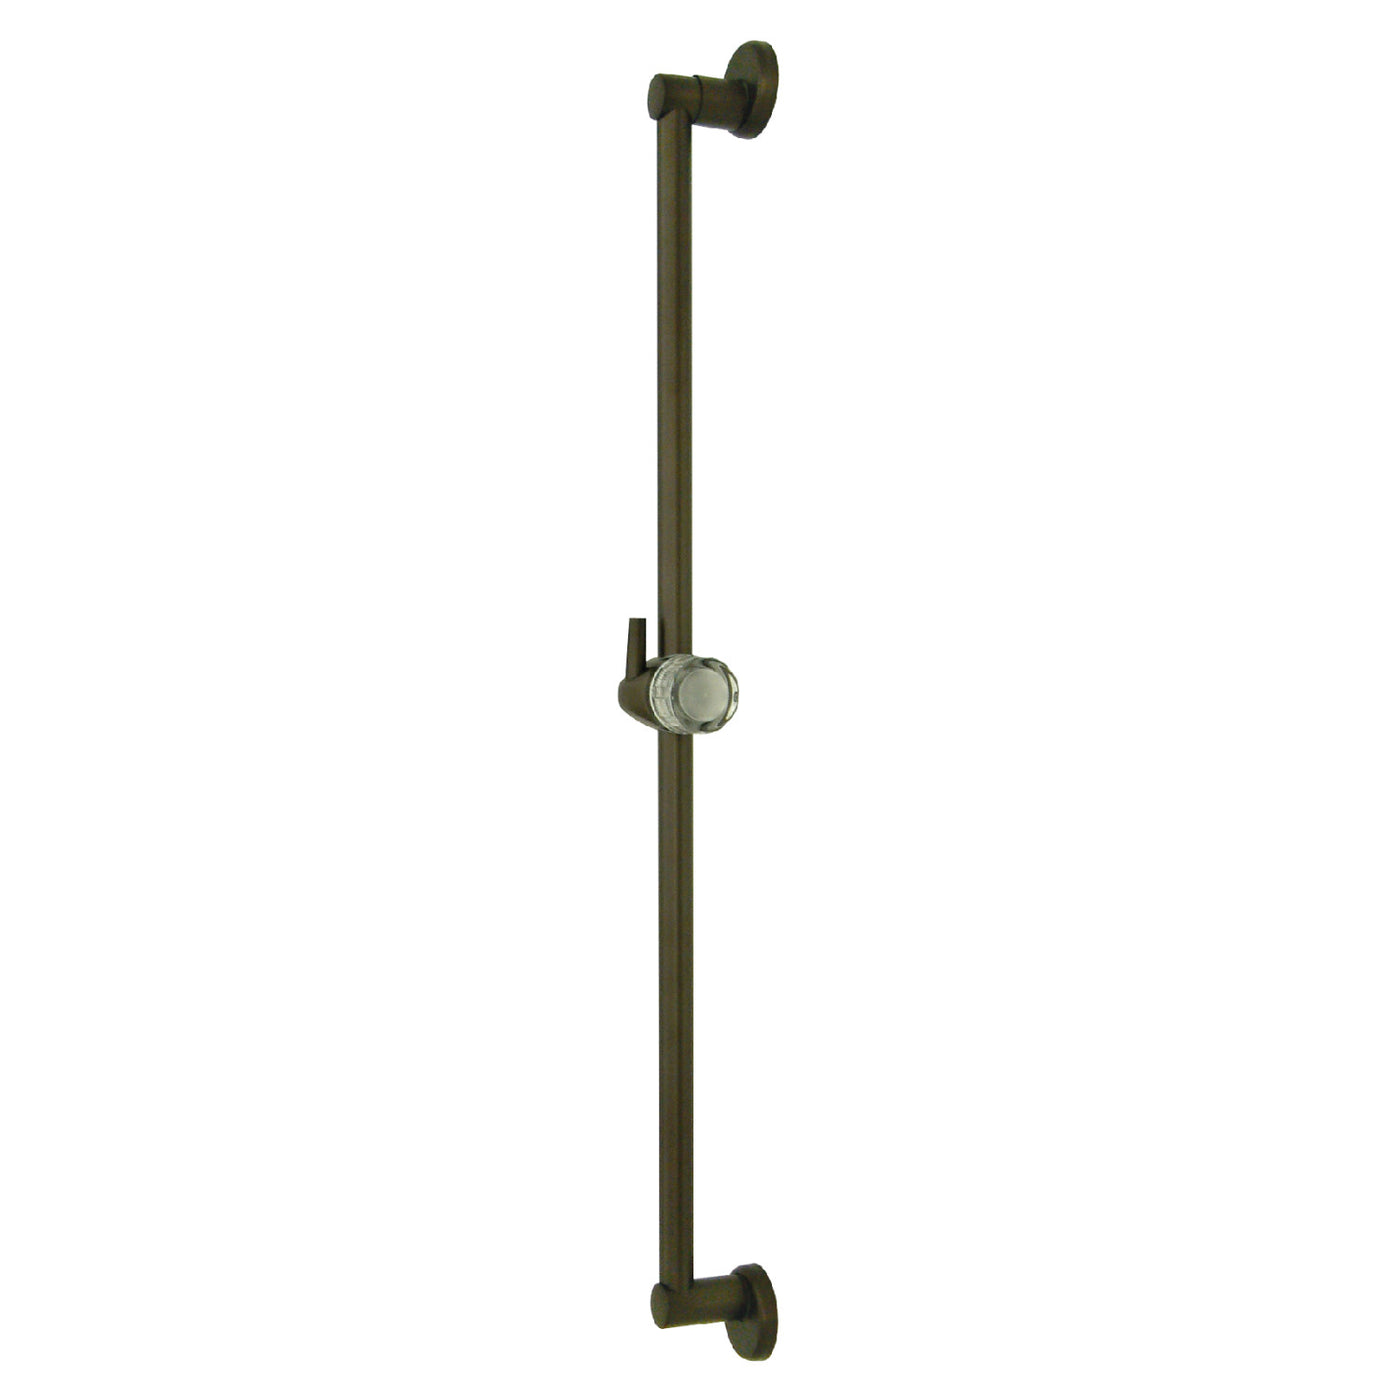 Elements of Design DK180A5 24-Inch Shower Slide Bar with Pin Mount Hook, Oil Rubbed Bronze